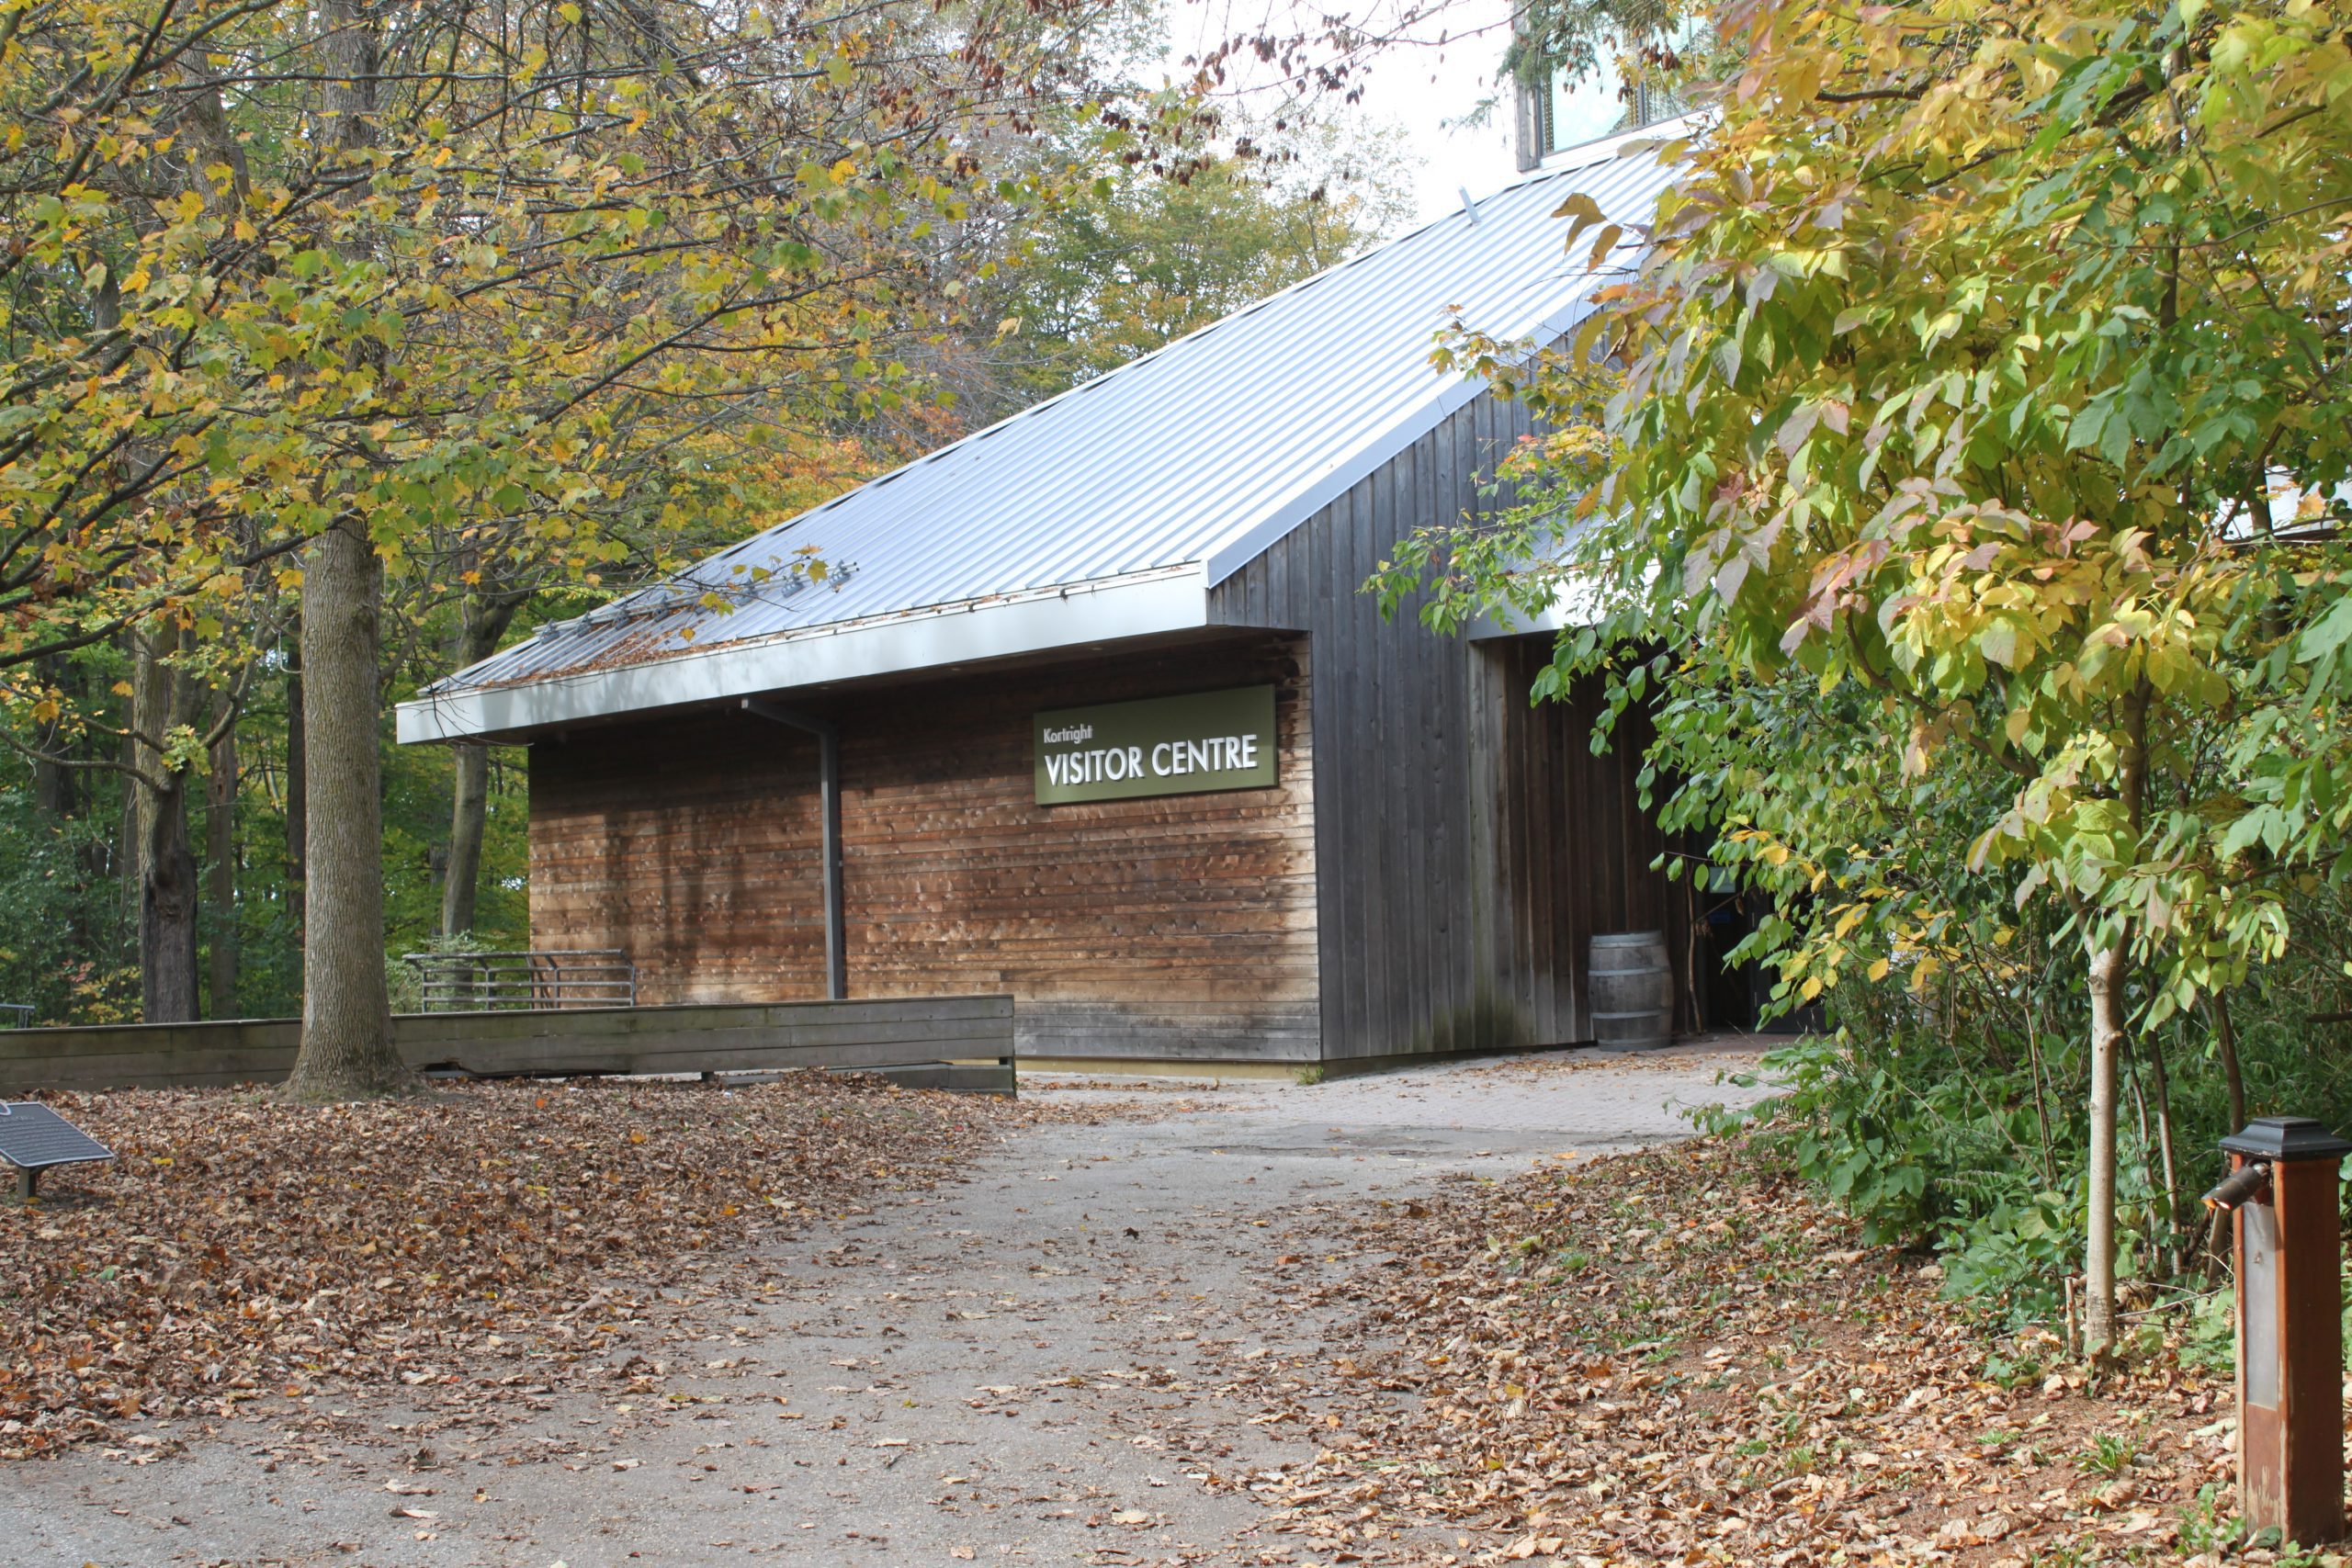 A wood-sided building with the sign Visitor Centre sits among a forest with a paved path leading to it.